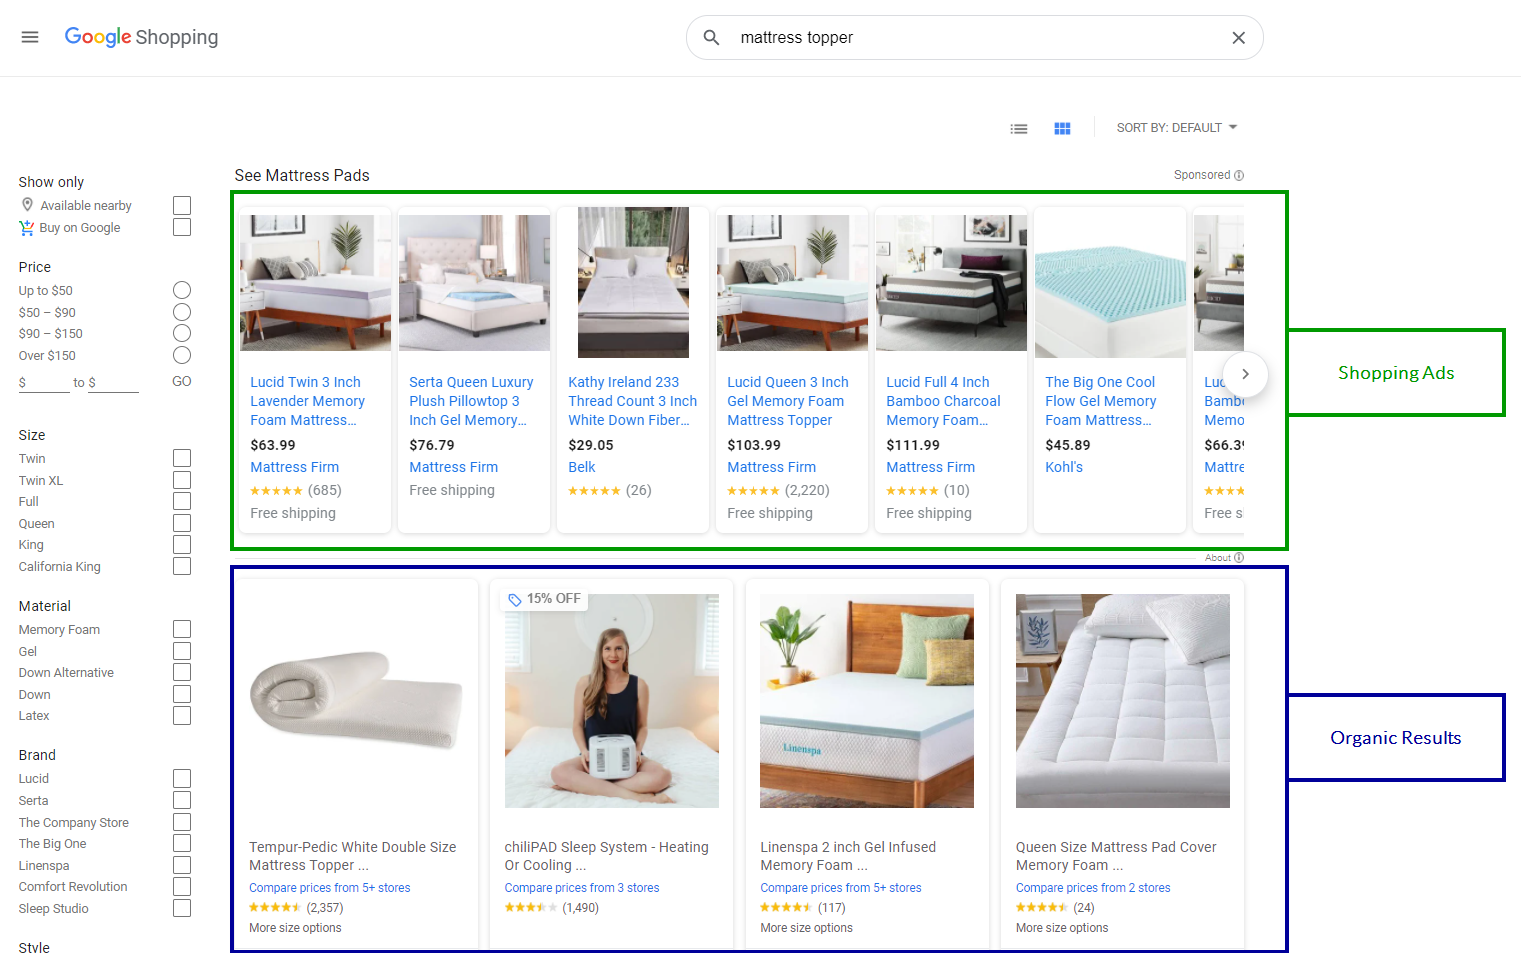 Google Shopping ads appearing on the Google Shopping search engine results